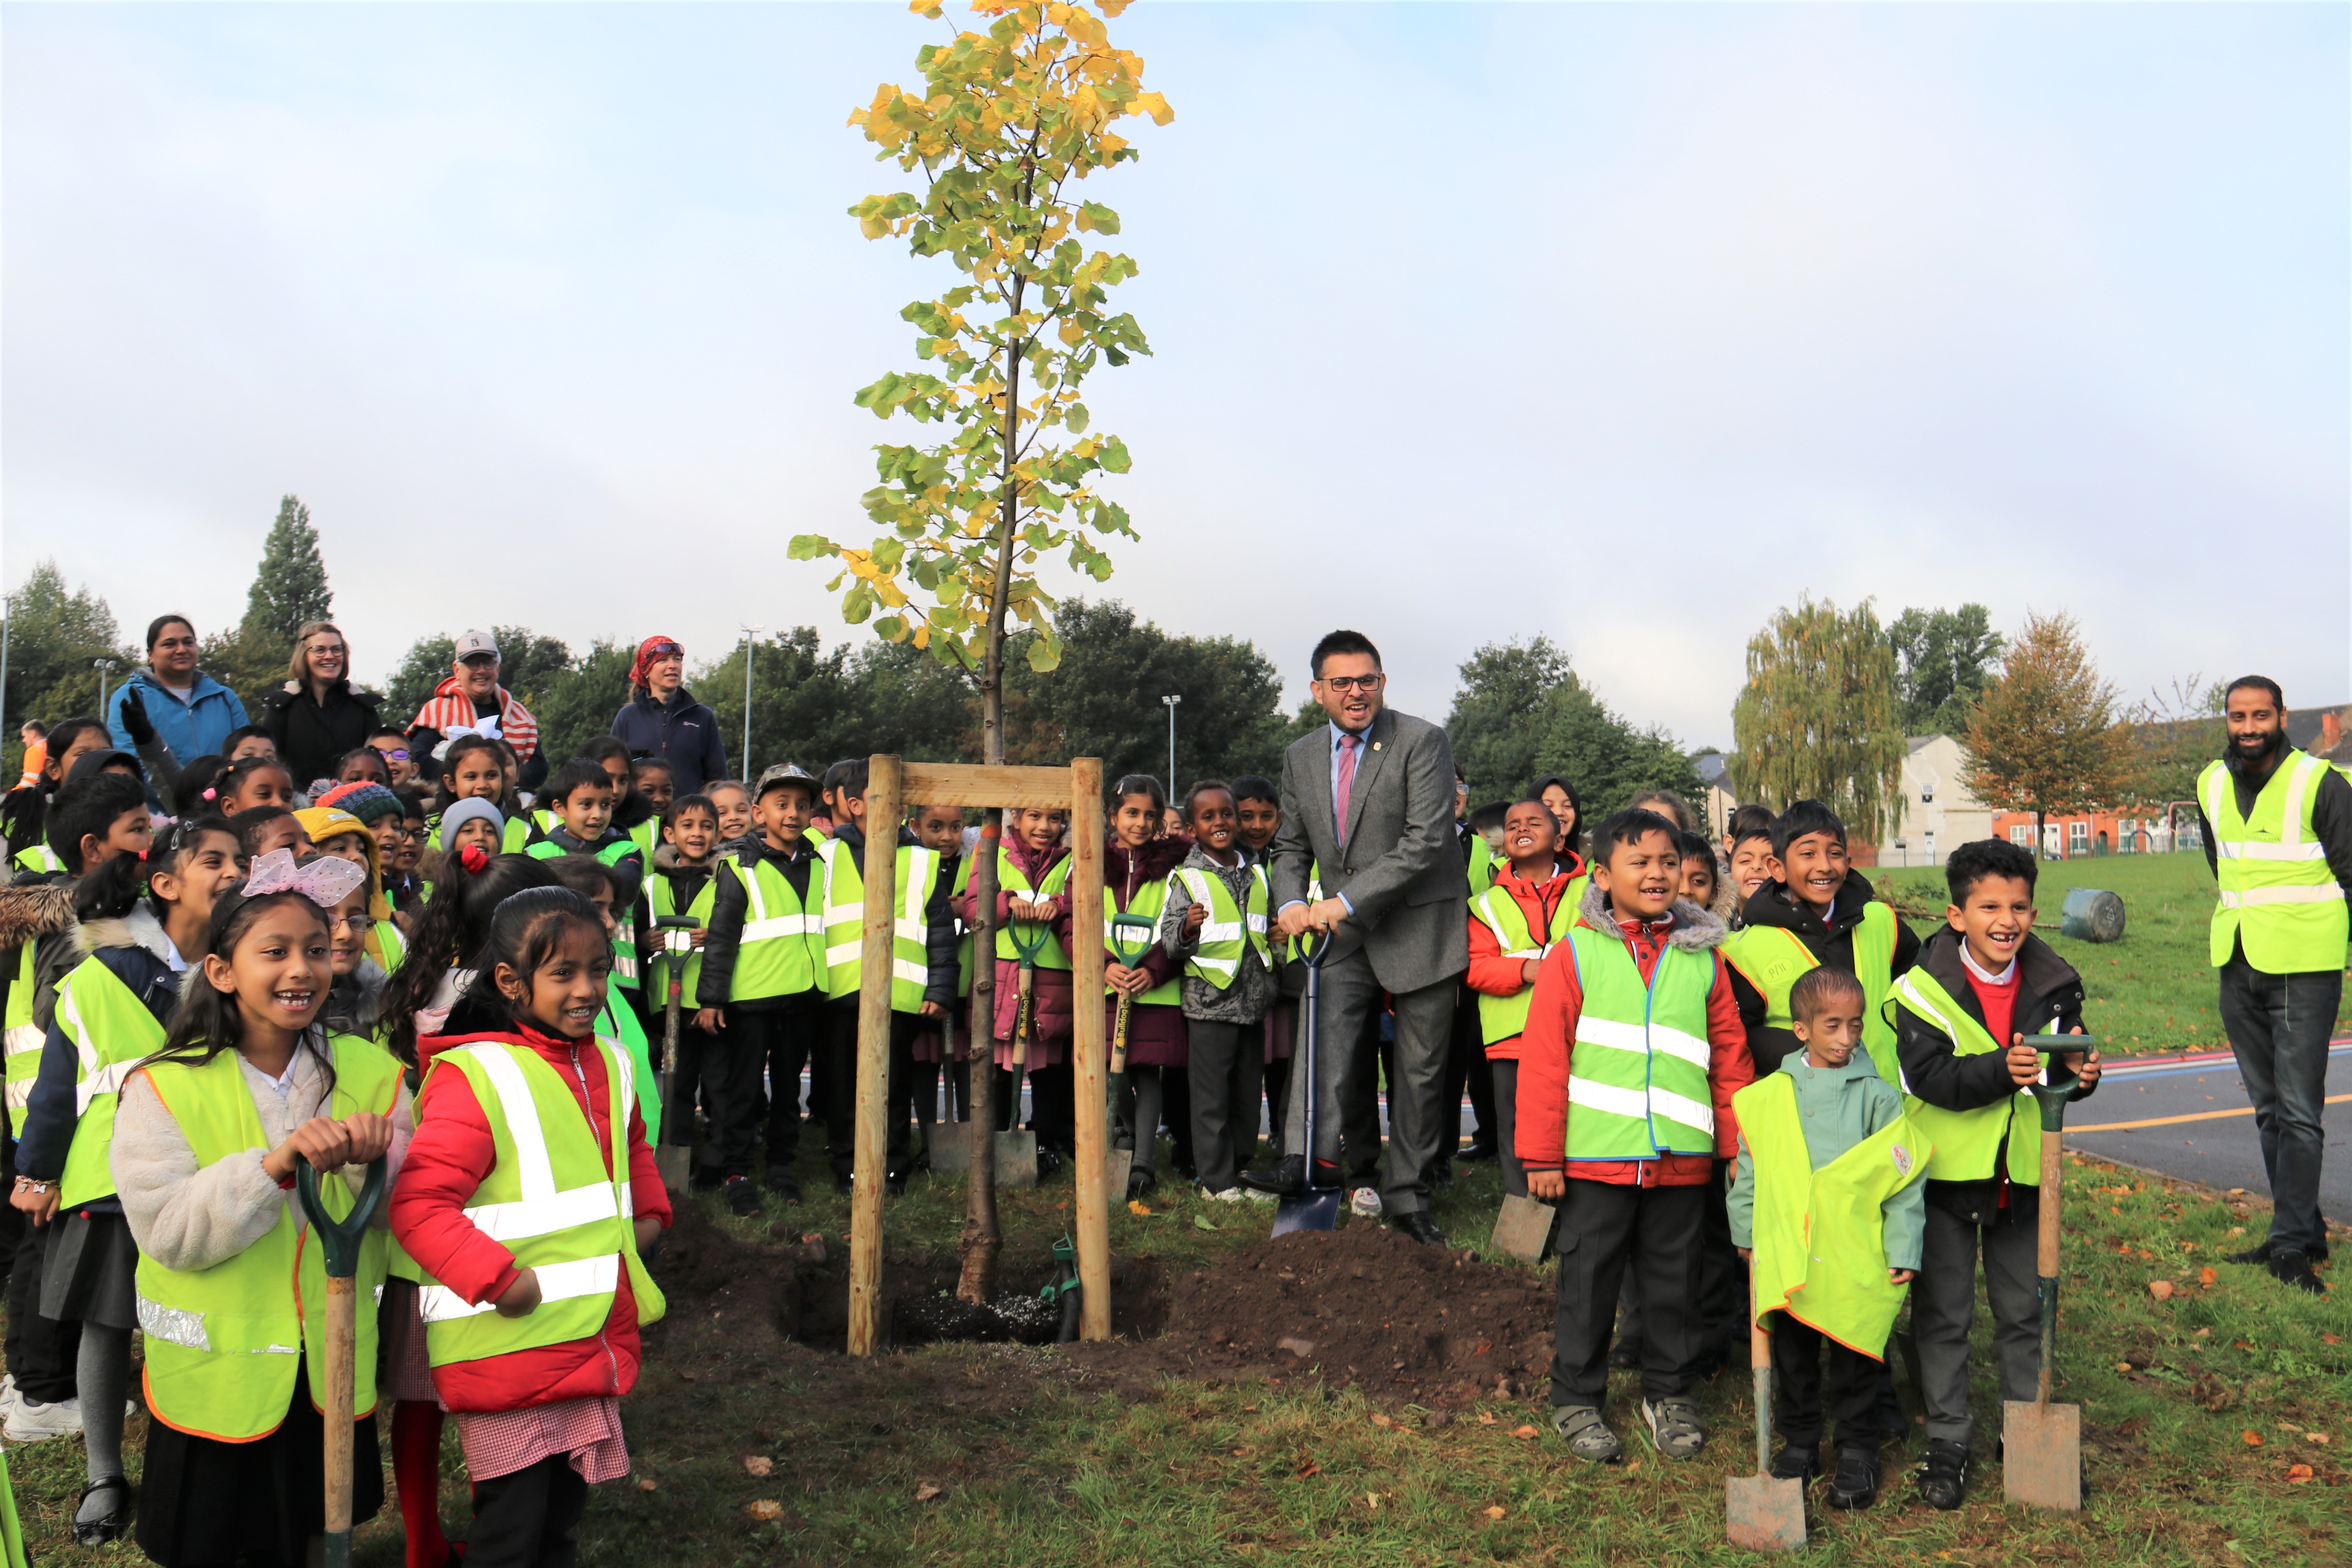 Cllr Waseem Zaffar joins pupils from Anglesey Primary School in Lozells to plant trees in Georges Park